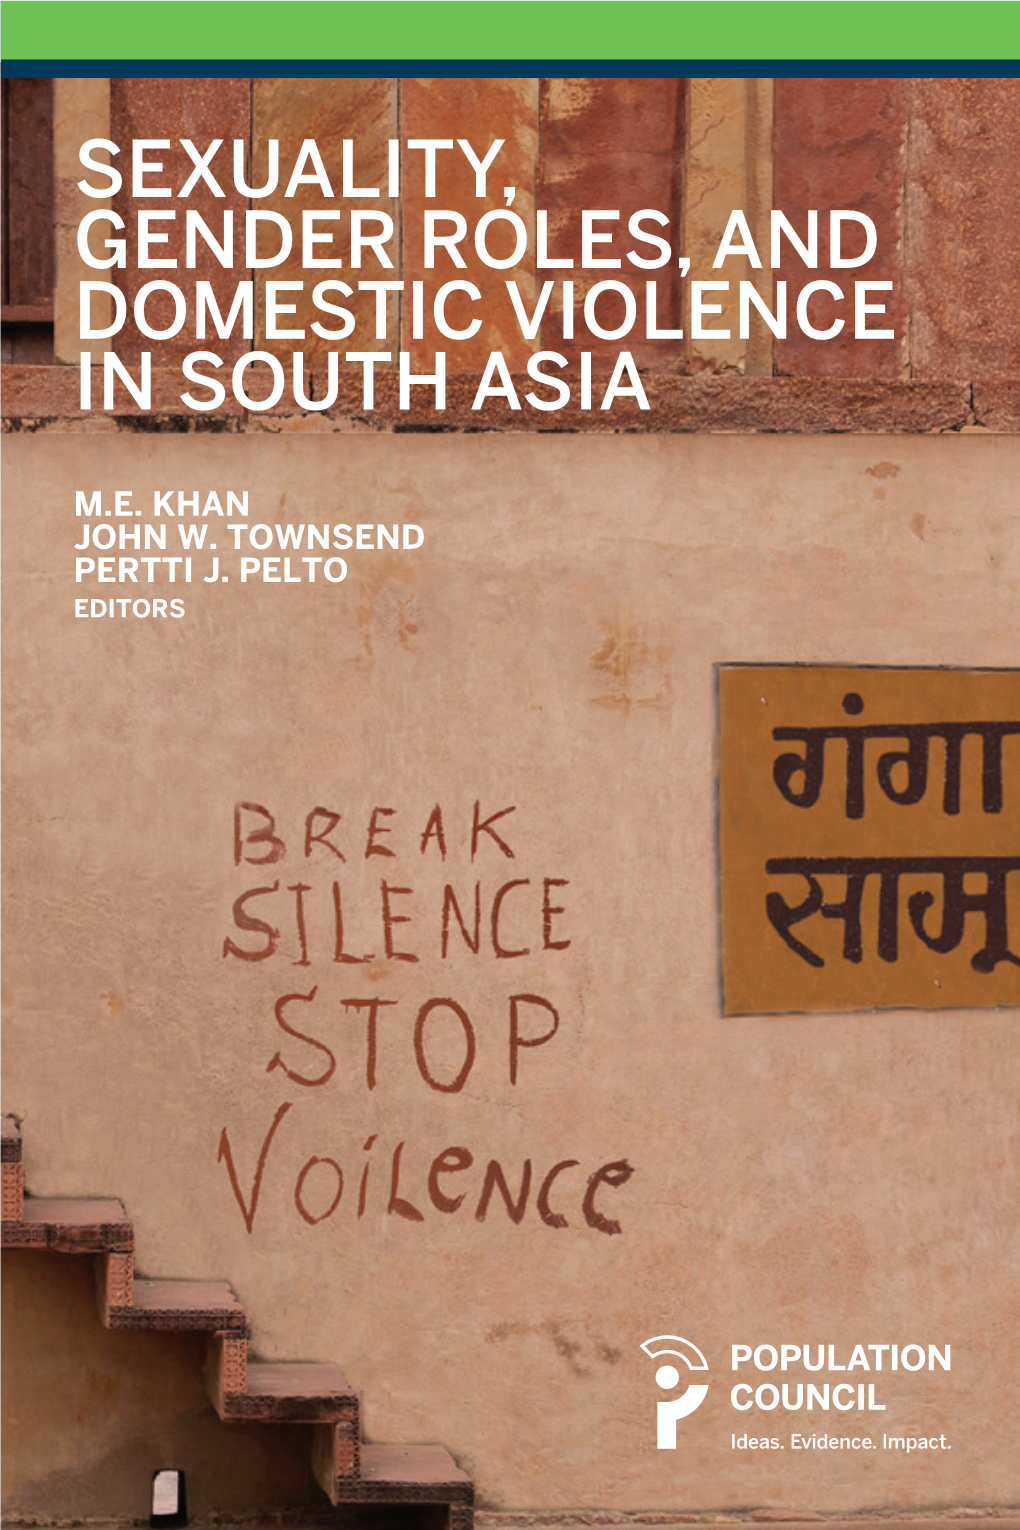 Sexuality, Gender Roles, and Domestic Violence in South Asia